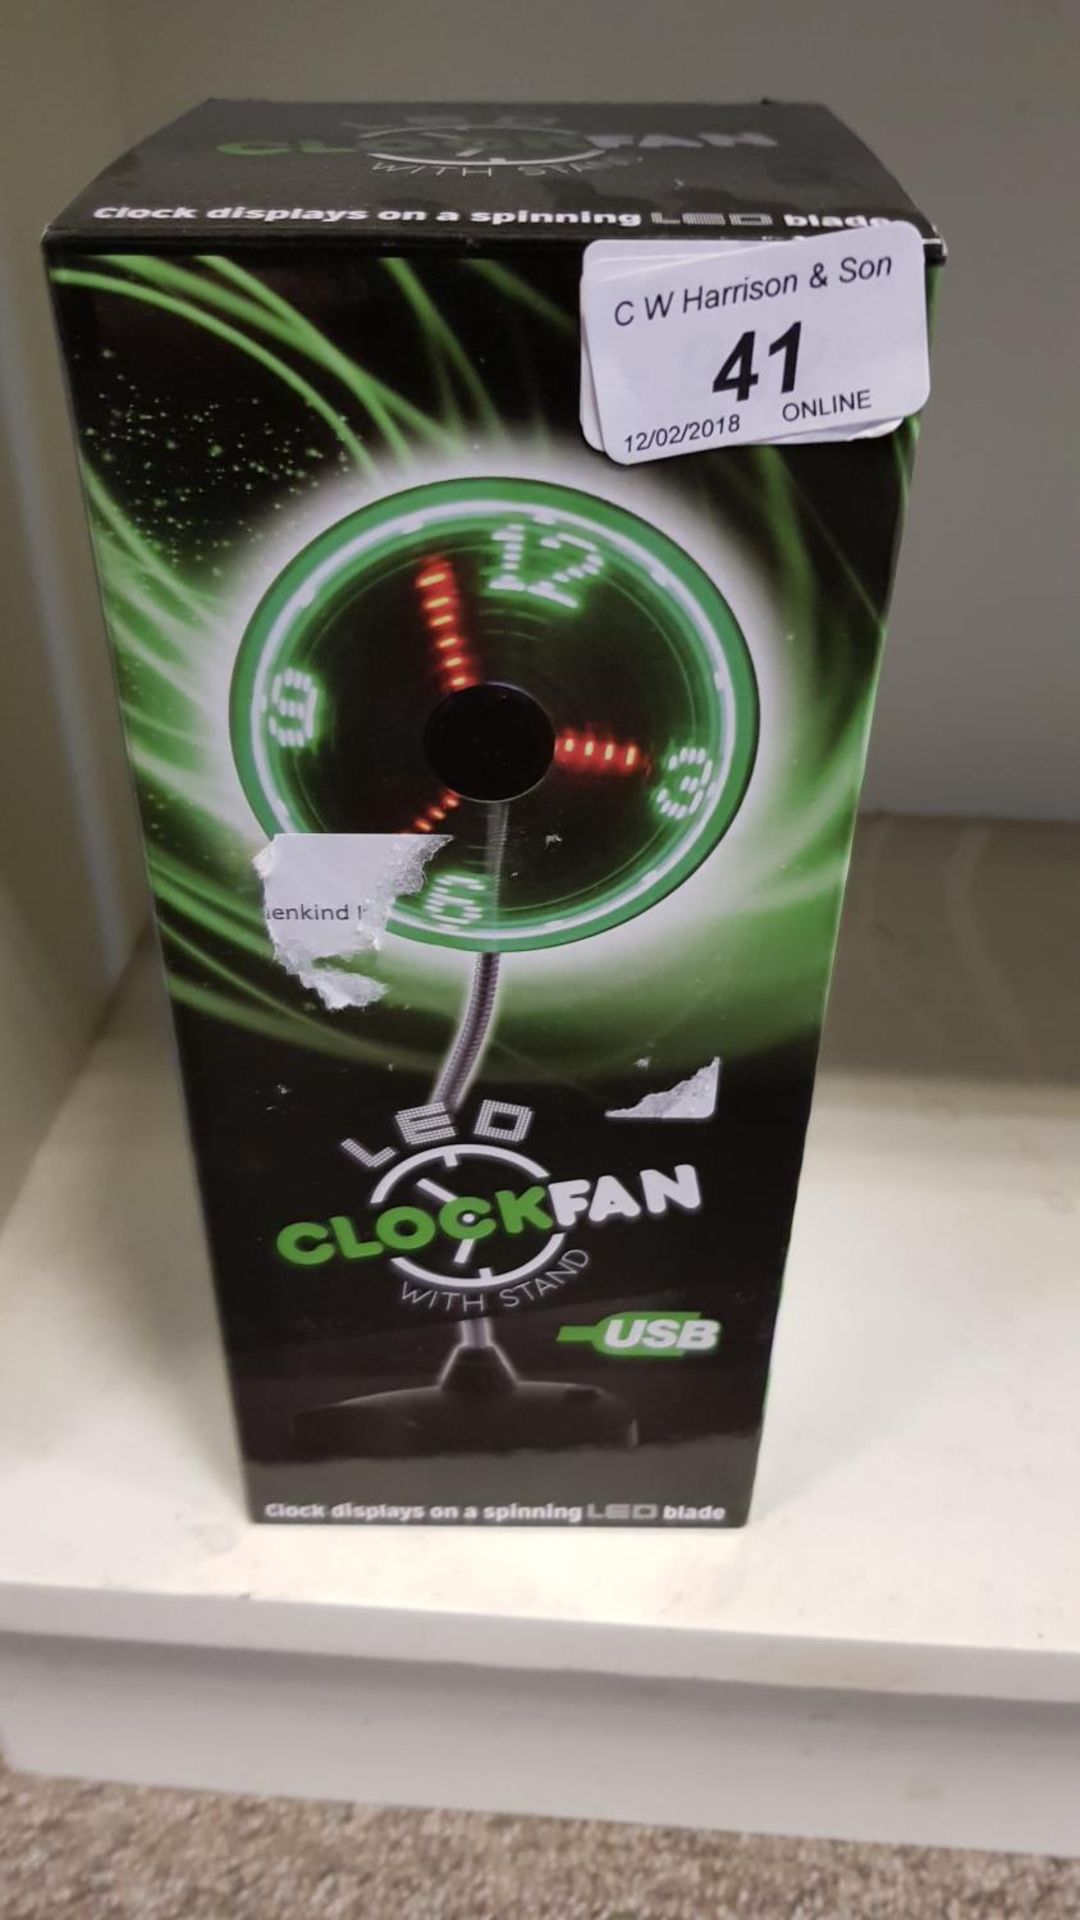 LED Clock Fan with stand